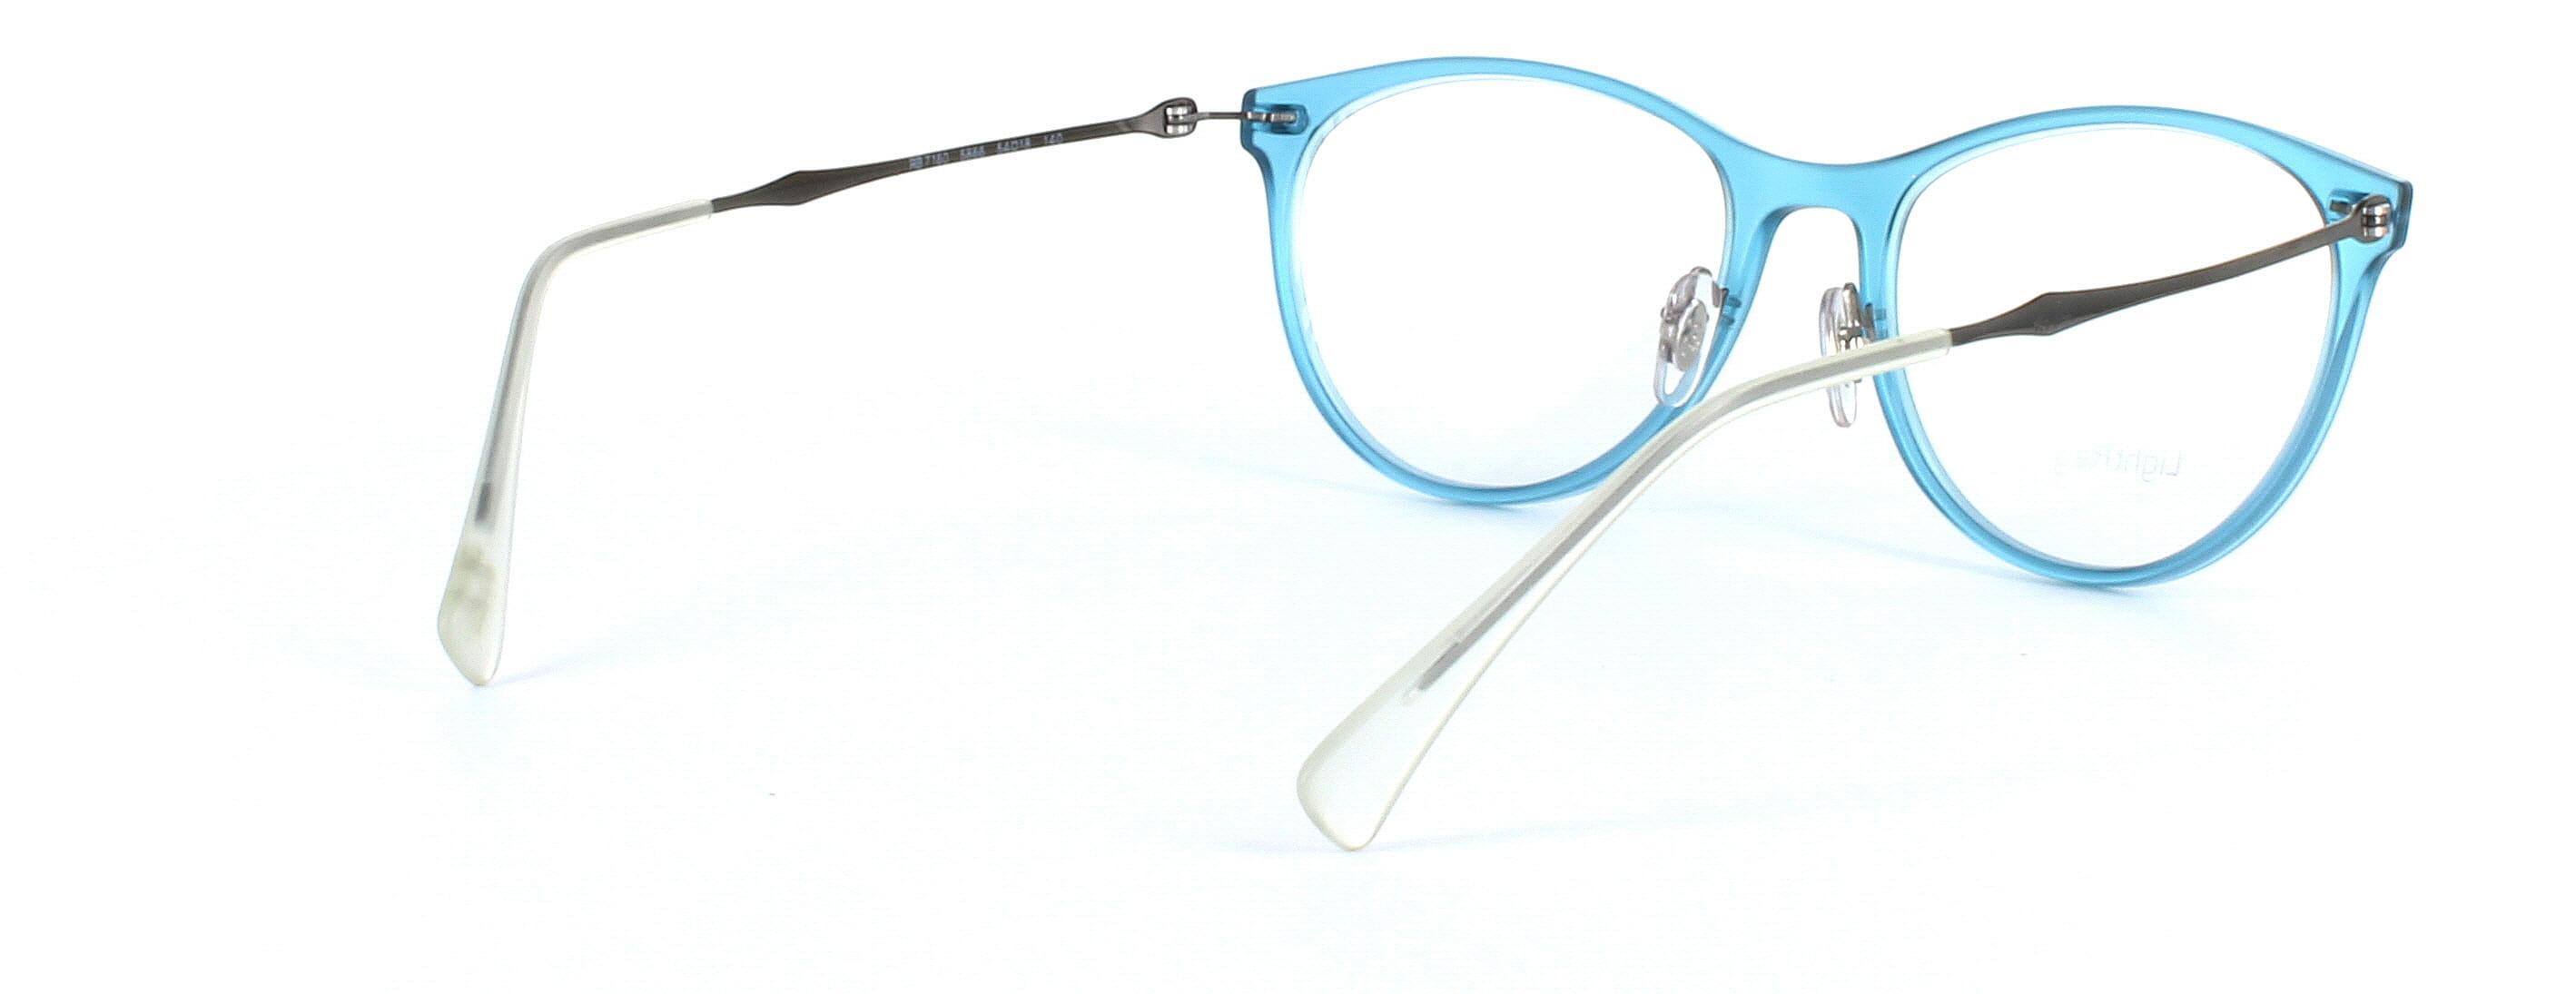 ray Ban 7160 - ladies acetate frame in blue - image view 4